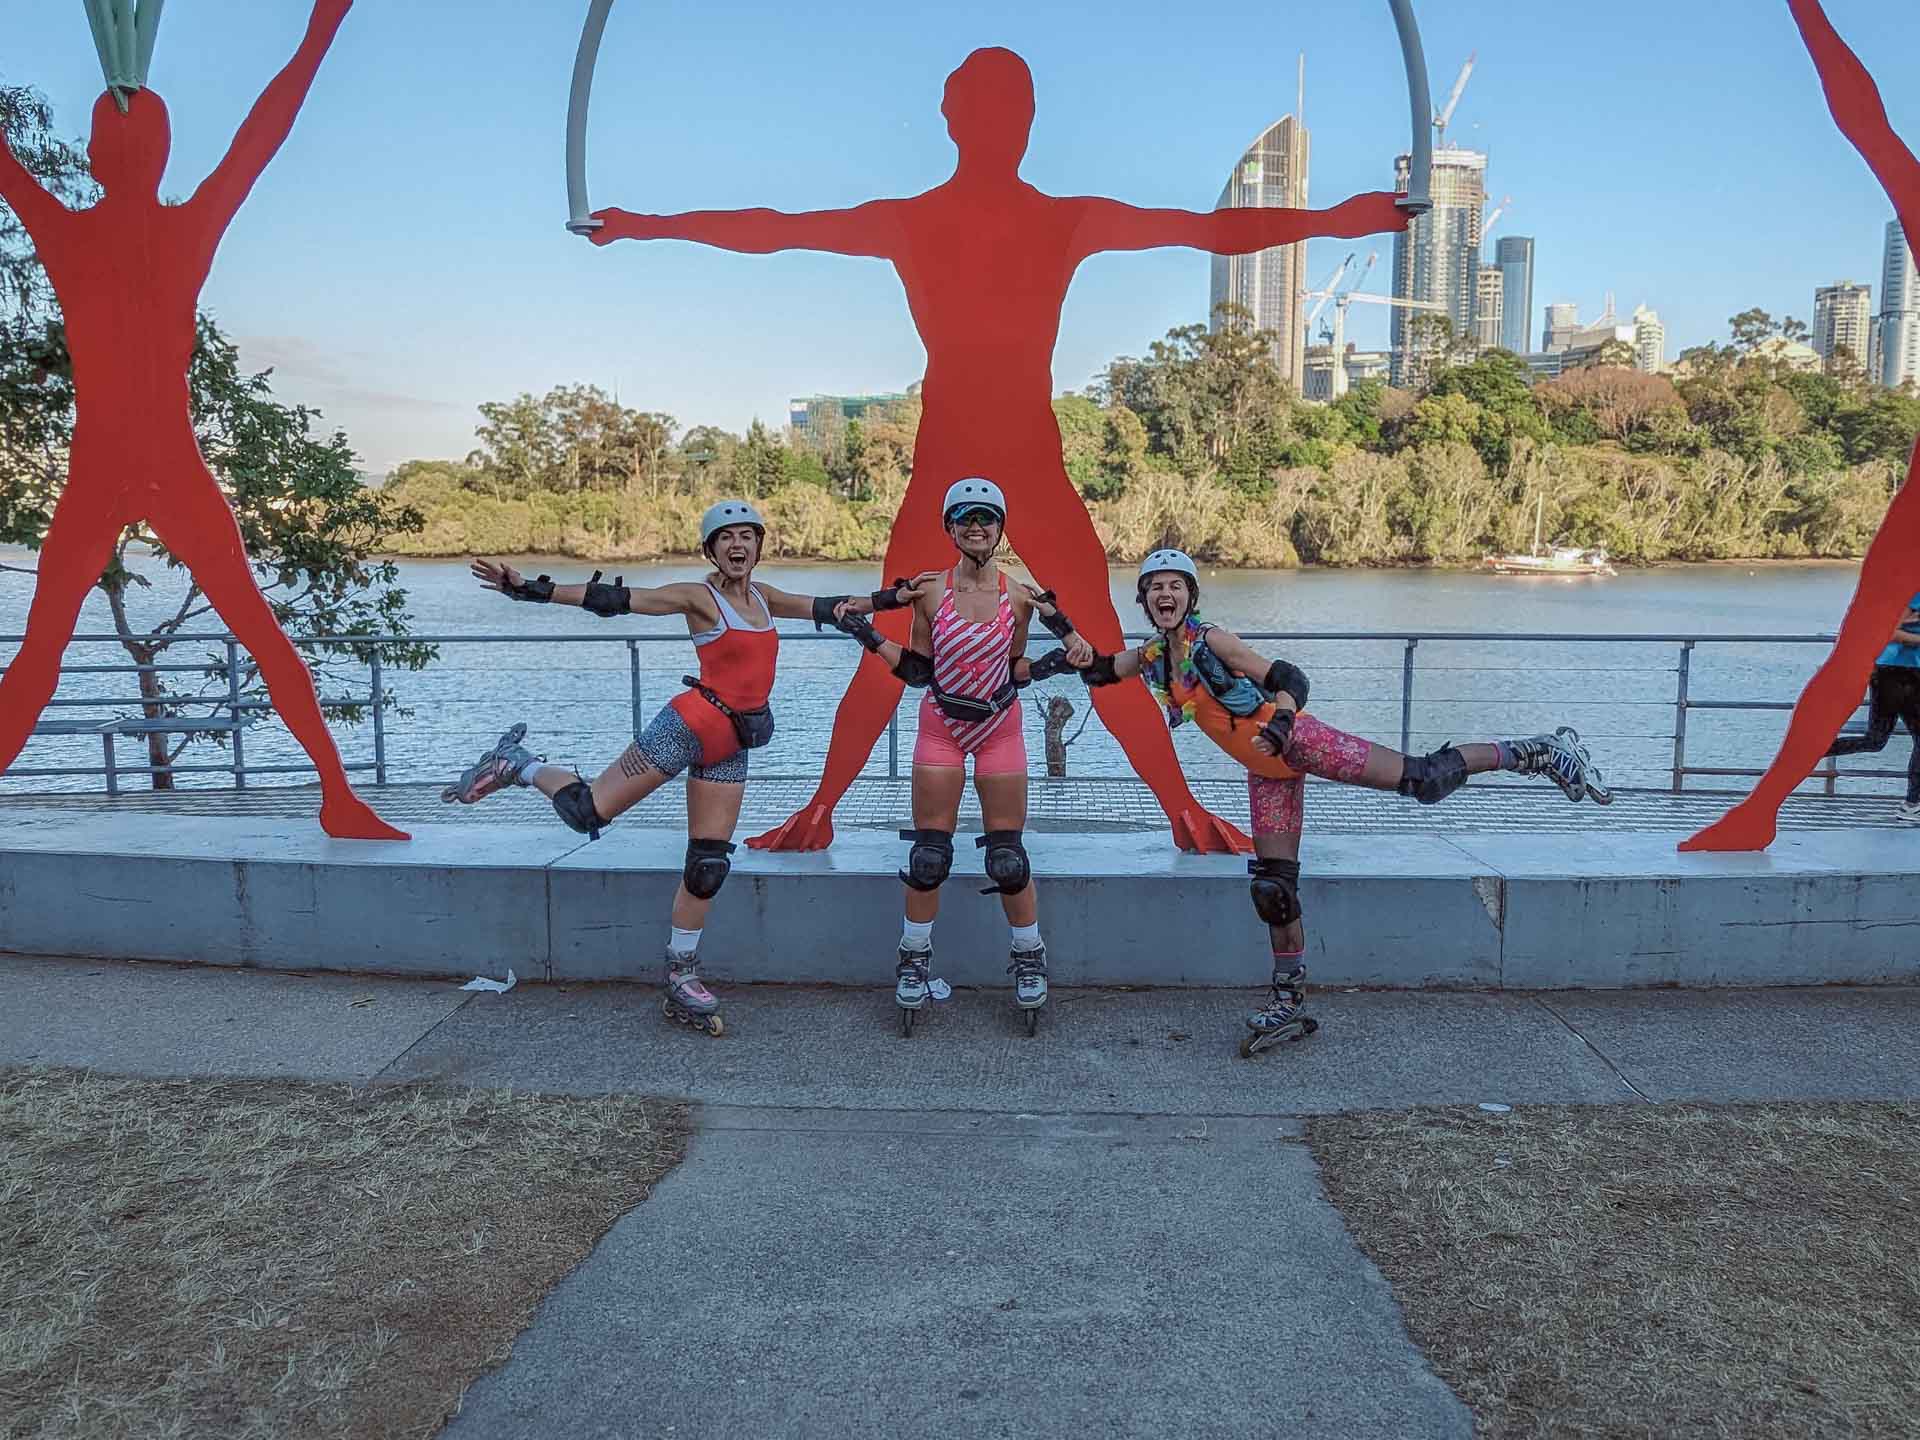 A 4am Rollerblading Commute to Work, rollerblading, brisbane, microadventure, three friends posing for a photo infront of red sculptures on the world expo '88 public art trail